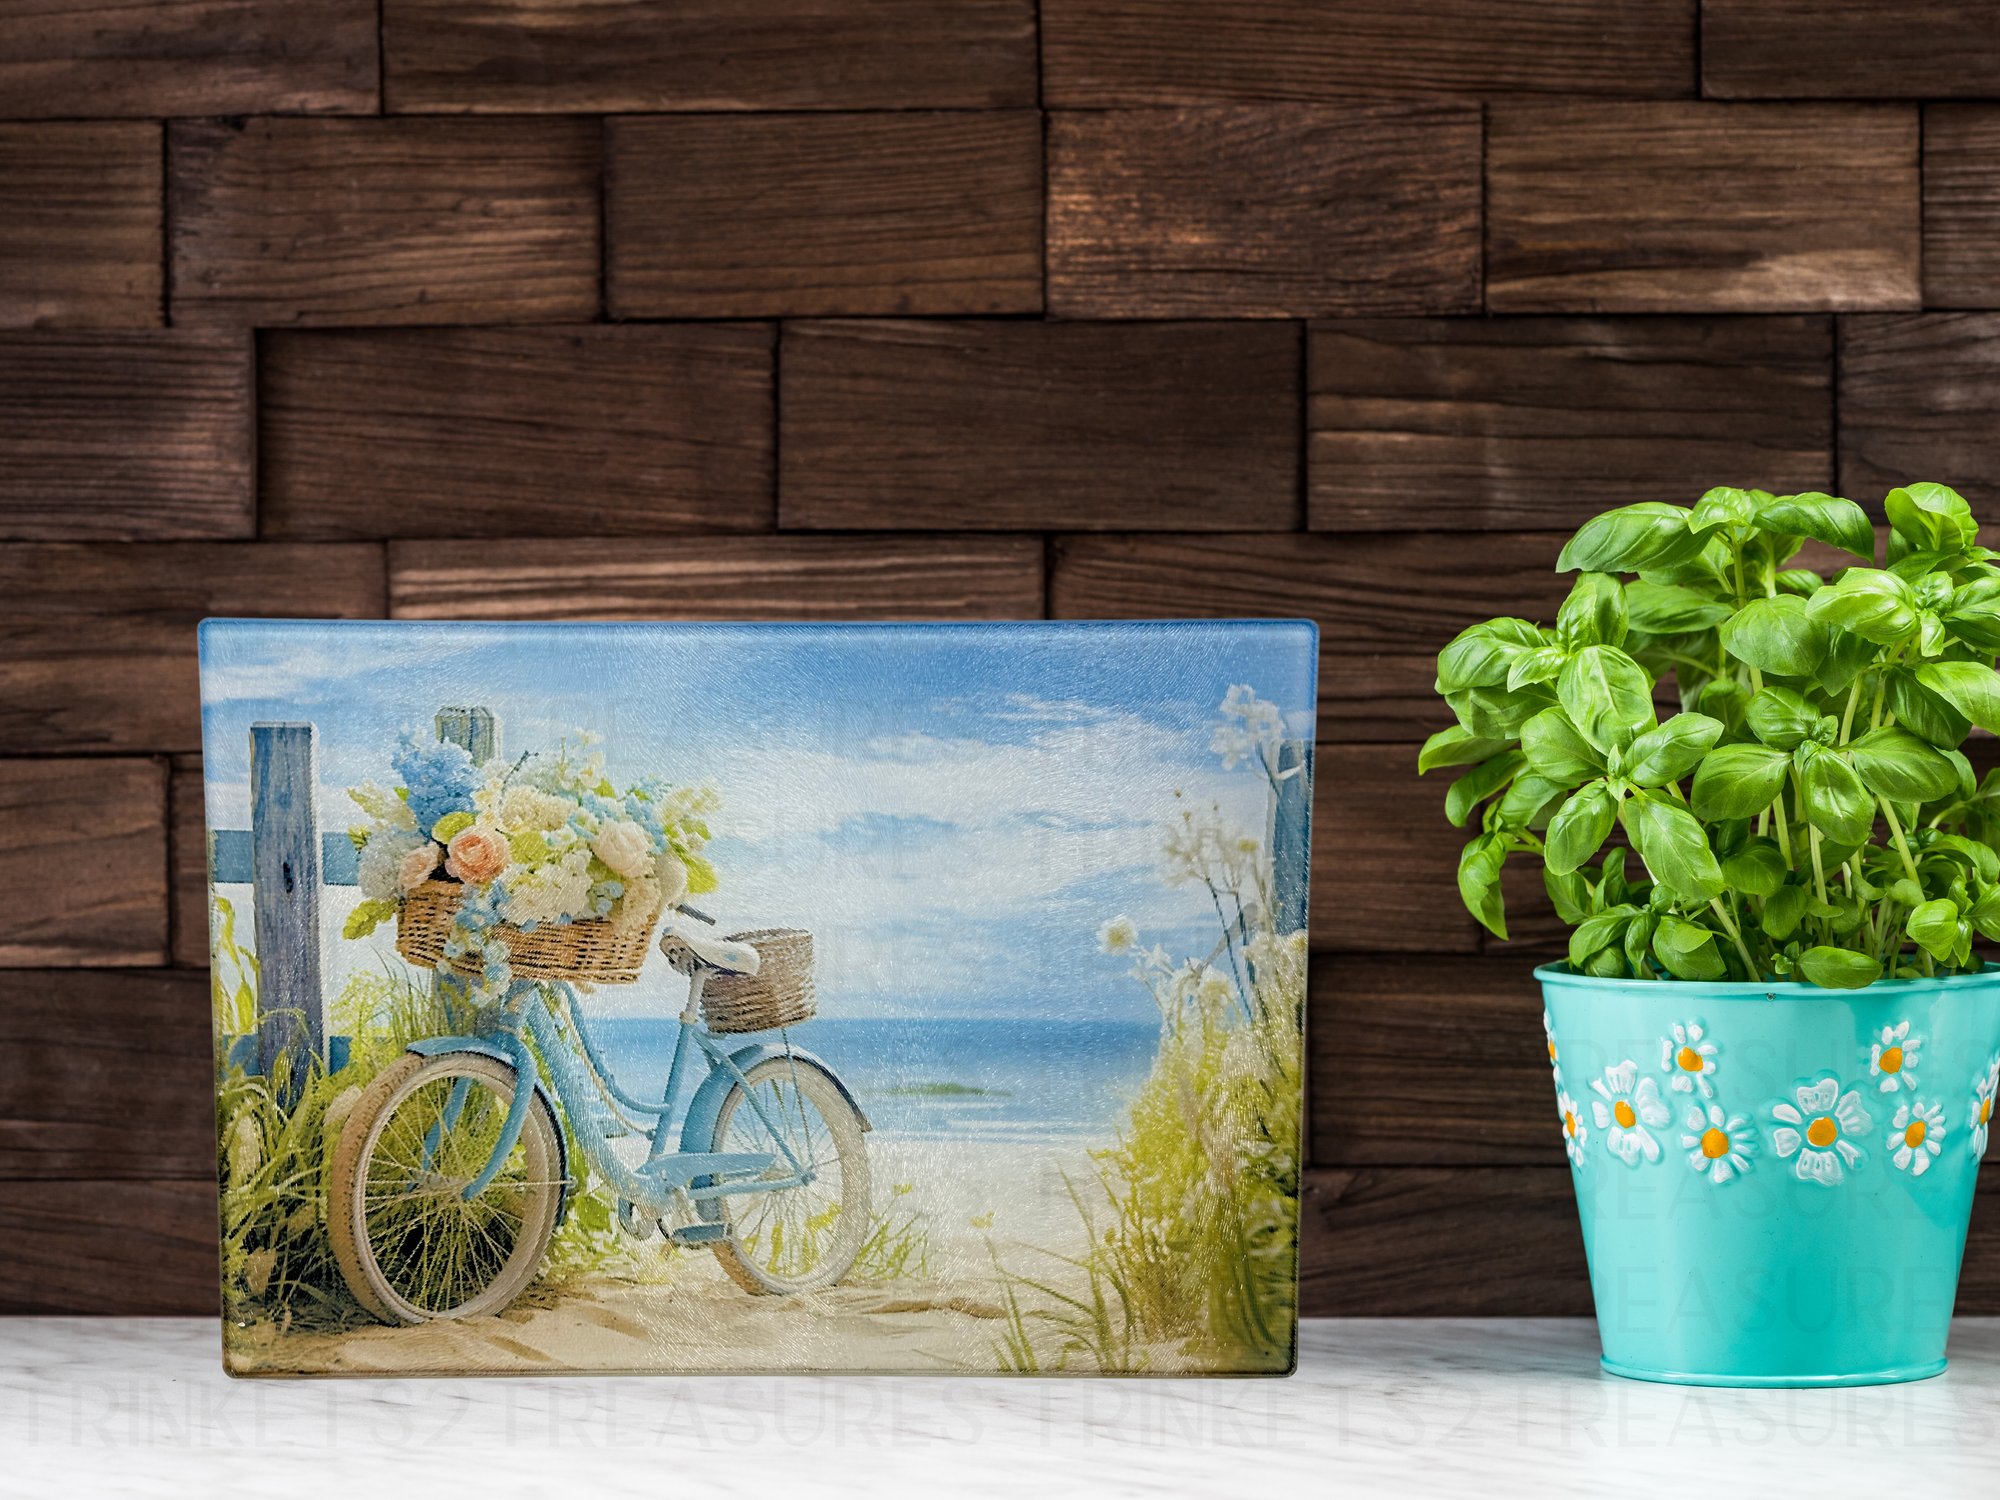 Personalized 8" x 11" Textured & Tempered Glass Cutting Board/beach Scene/Space Saving Kitchen Accessory/#601